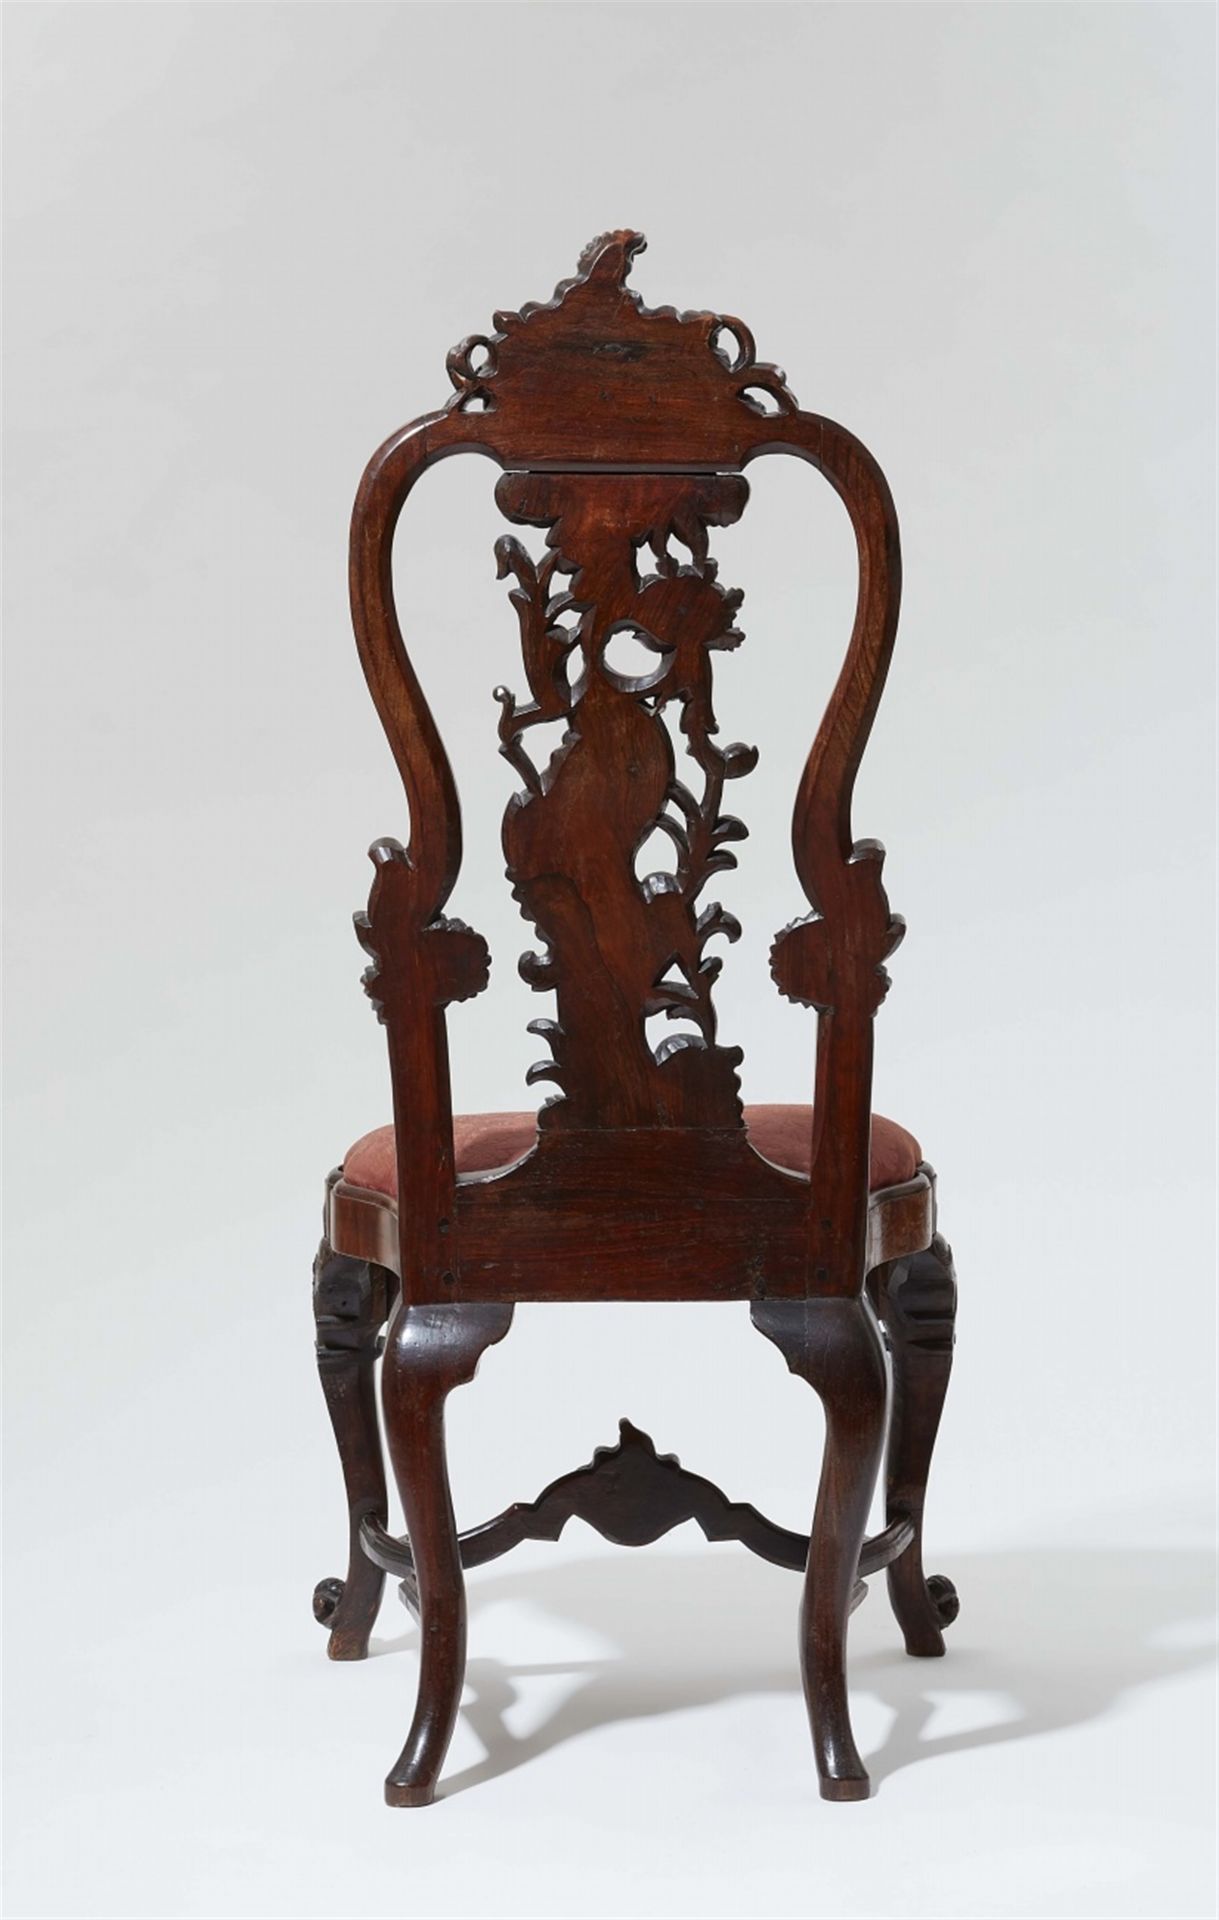 A pair of important Dutch Rococo chairs - Image 3 of 3